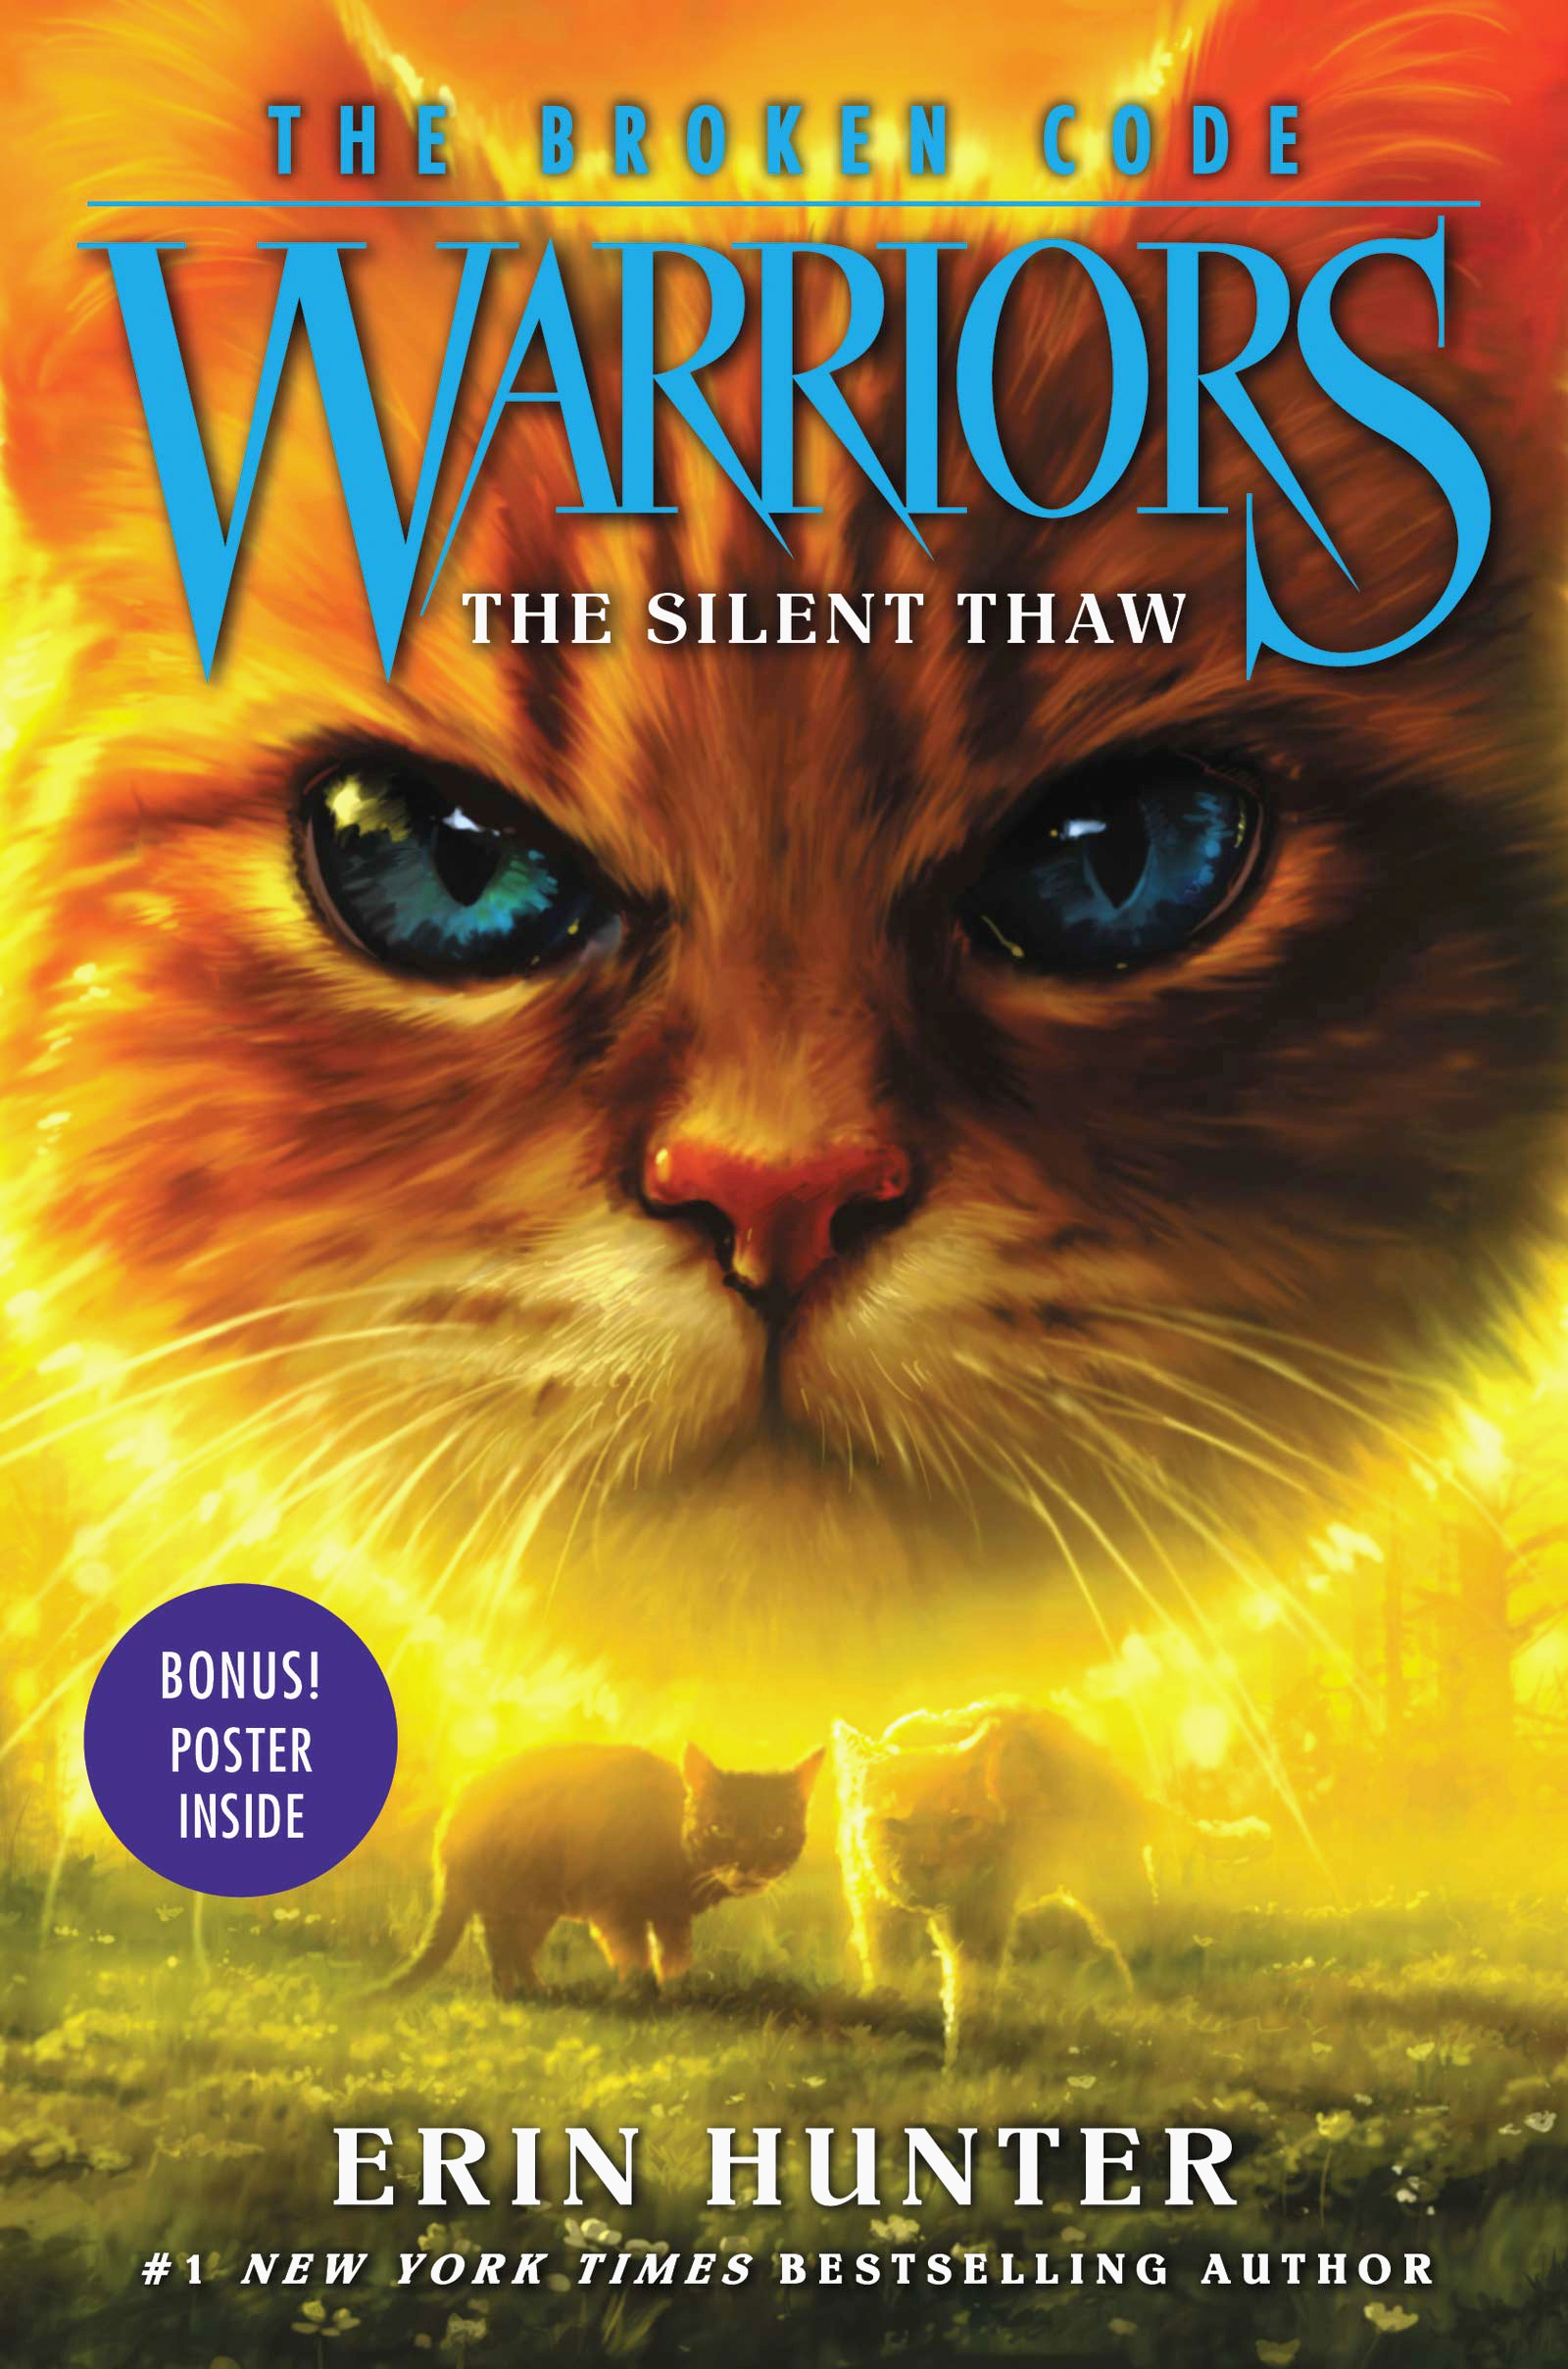 Warrior Cats codes – when will they arrive?